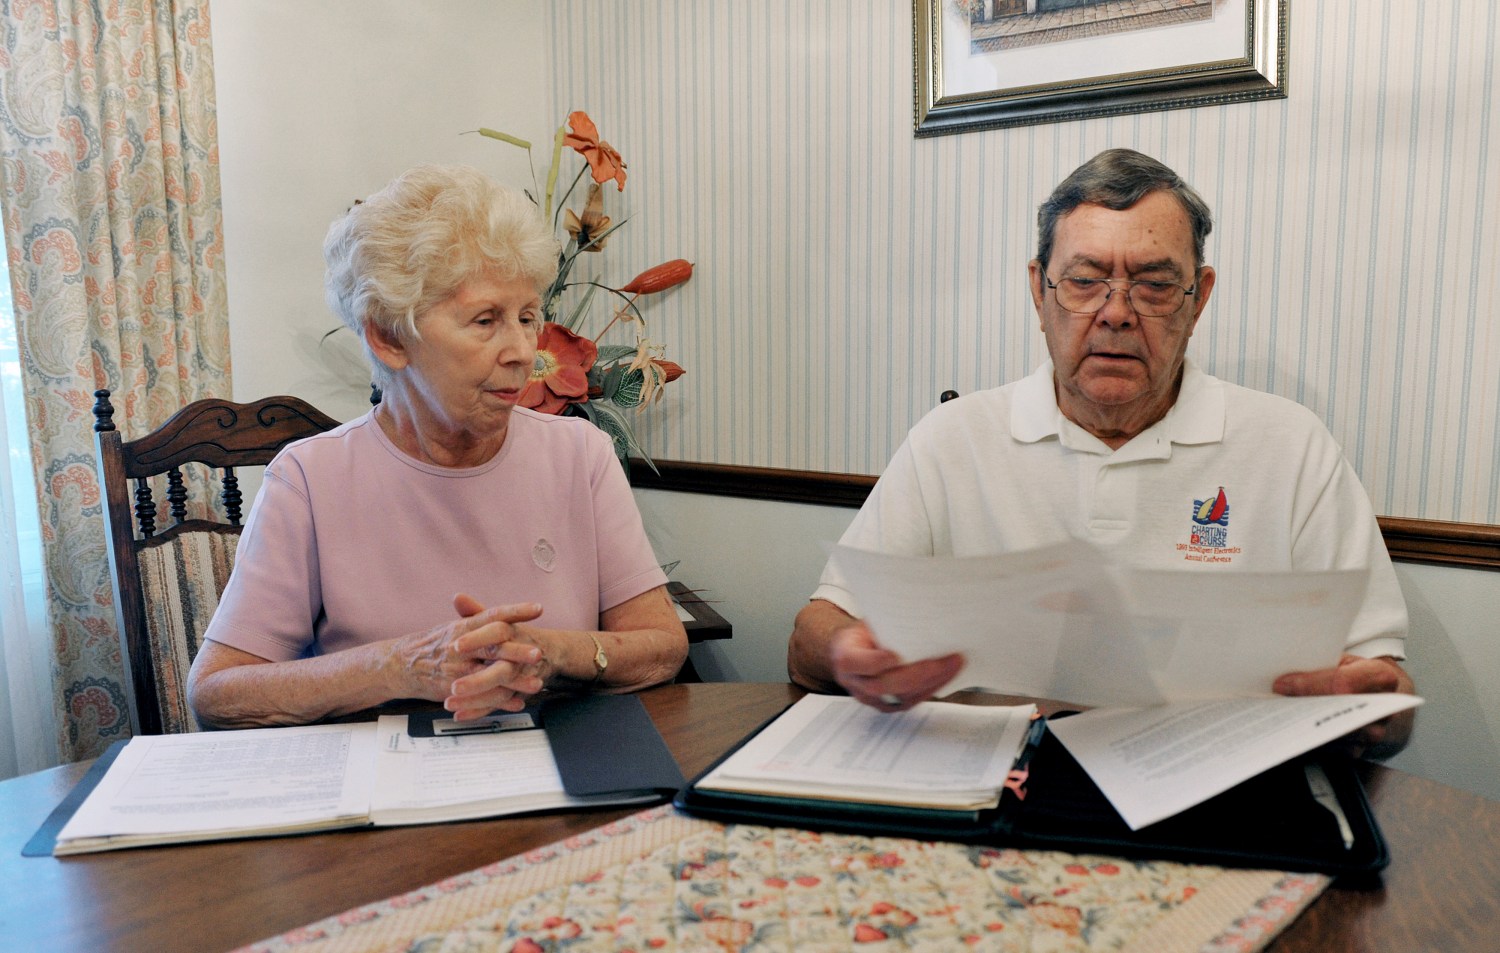 Retired engineer and his wife look over documents concerning their investments at their home in Orlando.